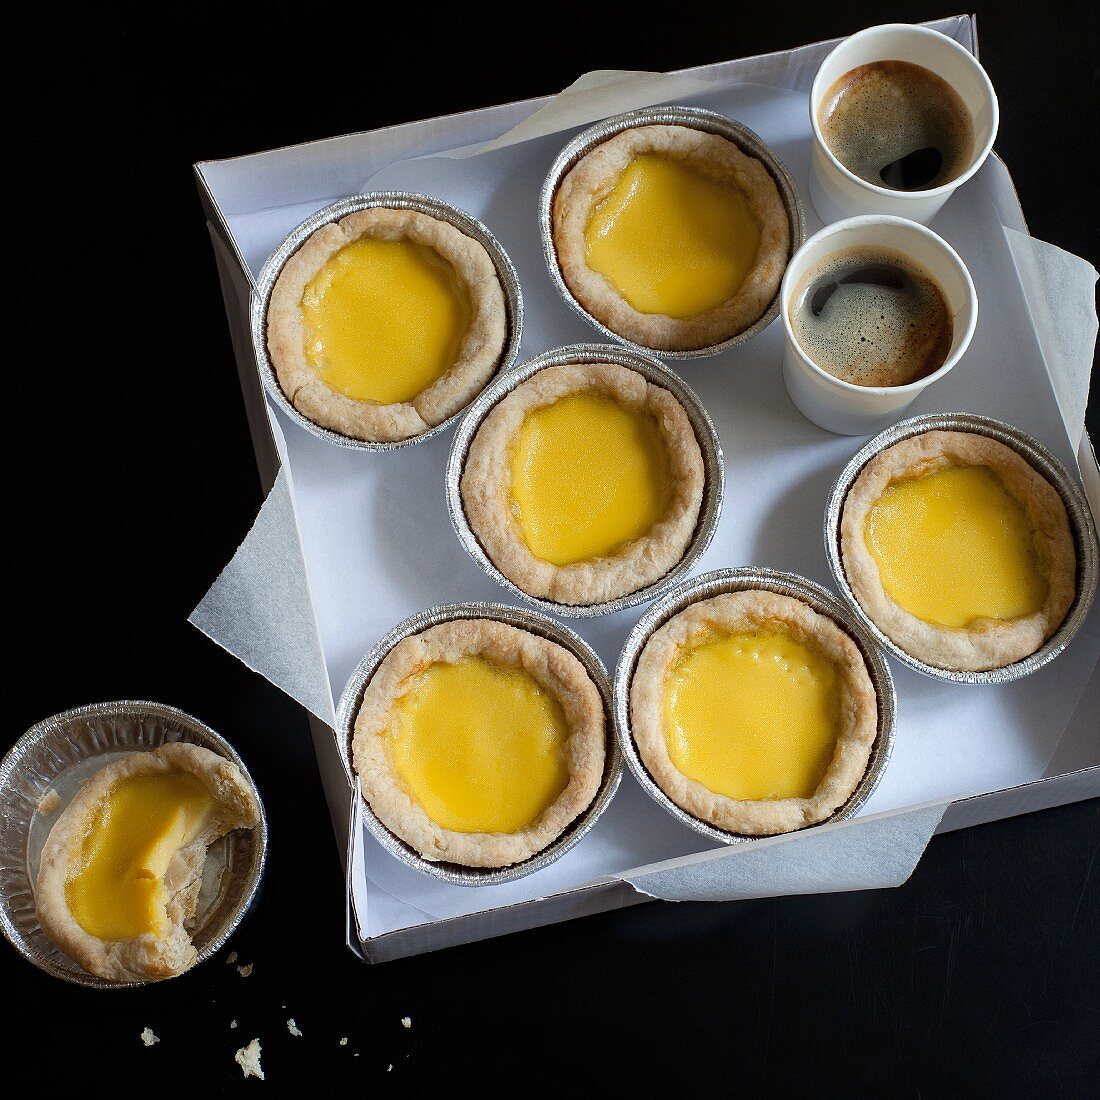 Chinese egg tarts and coffee